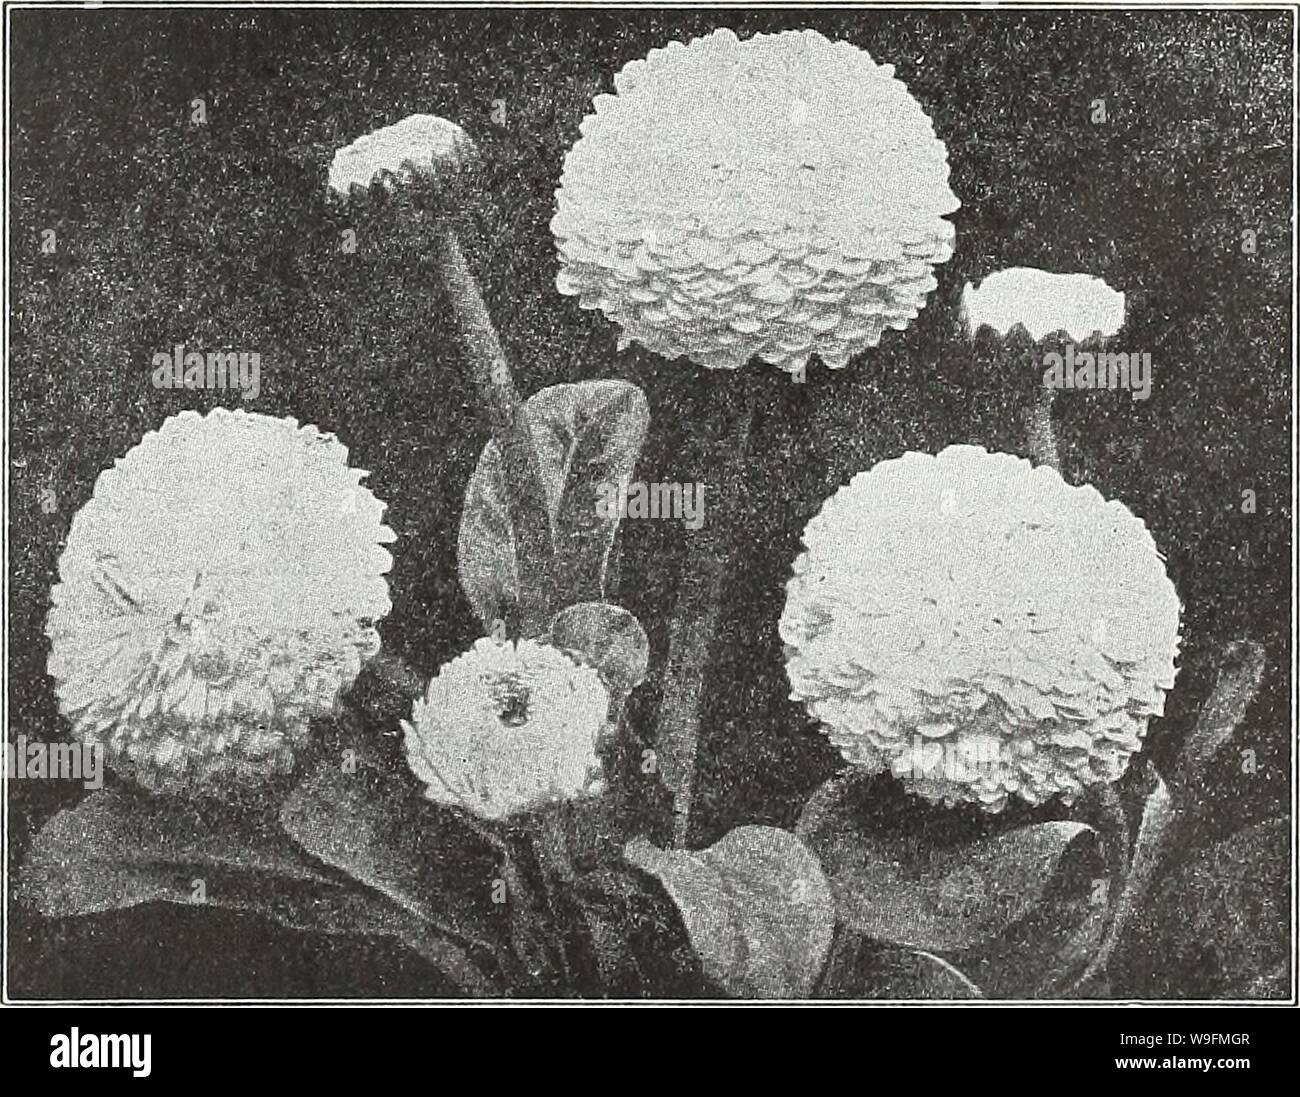 Archive image from page 54 of Currie's garden annual  spring. Currie's garden annual : spring 1936 61st year  curriesgardenann19curr 2 Year: 1936 ( CURRIE BROTHERS CO., MILWAUKEE, WIS Page 49 r /-&gt; r  •-i 2 € x l i- 4 yv&gt; T I Coreopsis—'Mayfield Giant' HARDY PERENNIAL CANDYTUFT GIBRALTRICA - SEMPERVIRENS White, shading CATANANCHE Charming, hardy perennial, attaining about 3 feet in height. Excellent for cutting or as a border plant. BICOLOR—Blue and white flowers. Seeds Pkt. 15c COERULEA—Blue flowers. Seeds Pkt. 15c CRUCIANELLA (Crosswort) STYLOSA—Hardy perennial, suitable for rock wor Stock Photo